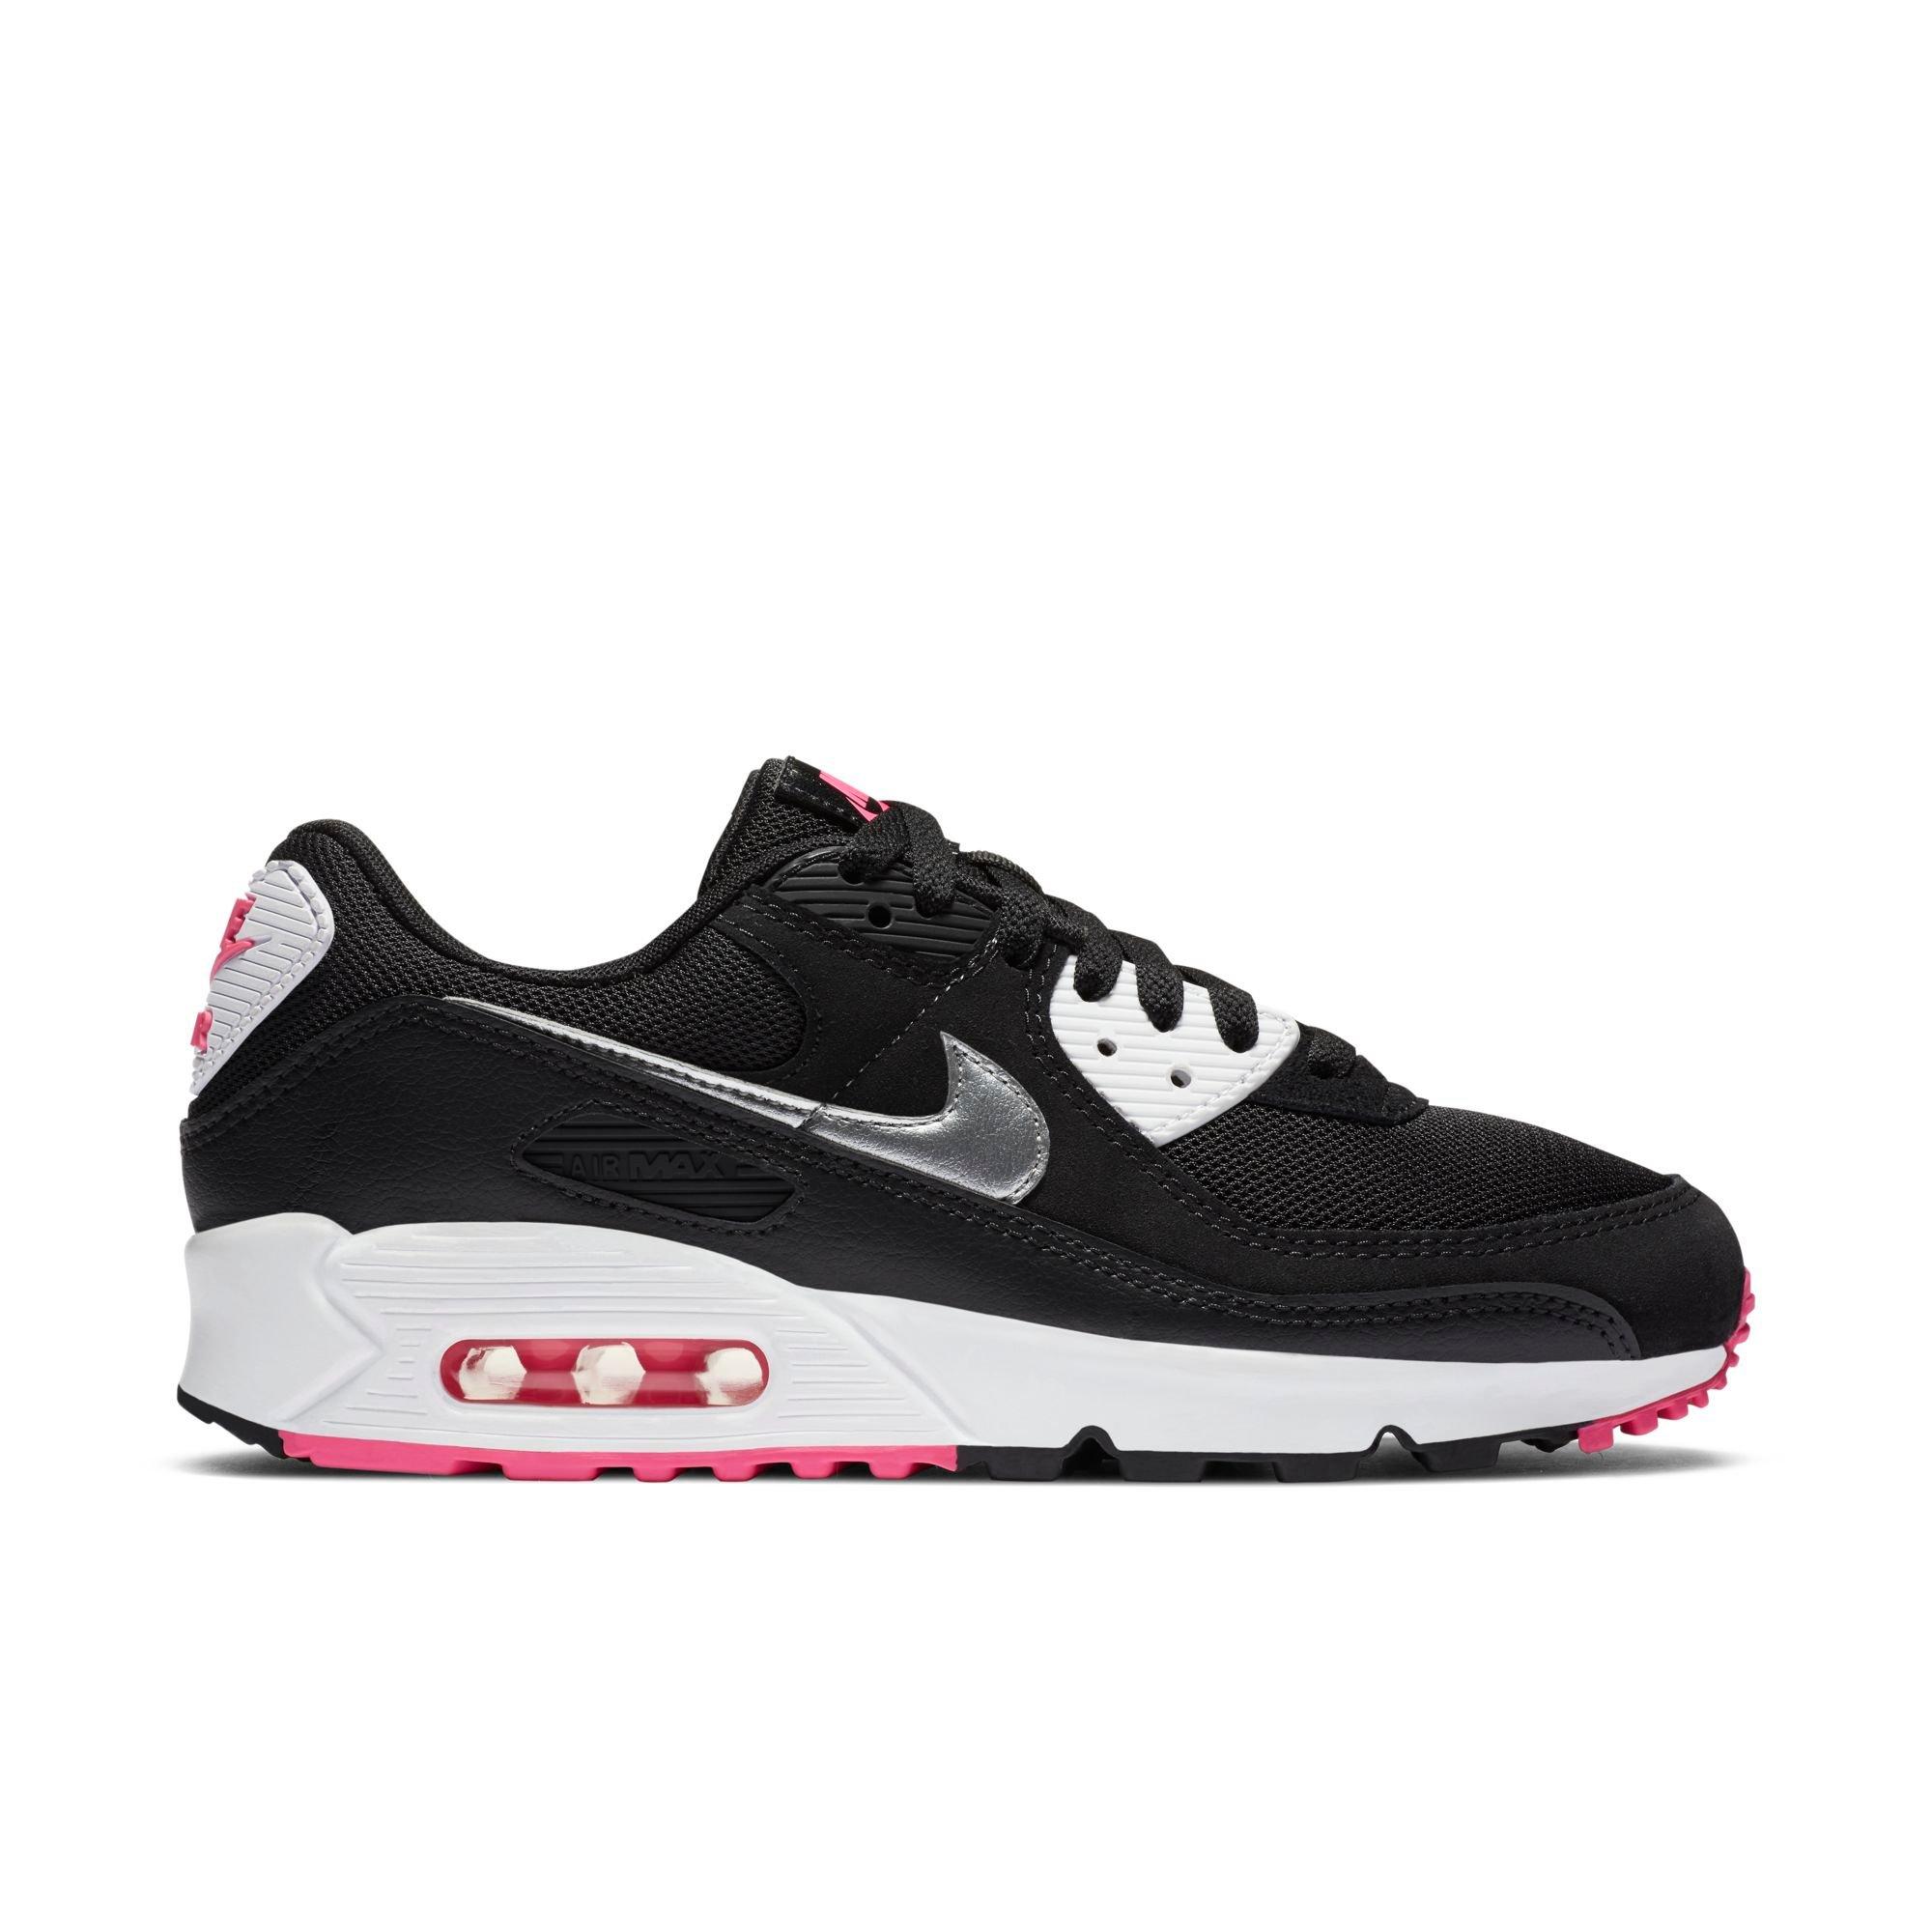 nike air max womens pink and white